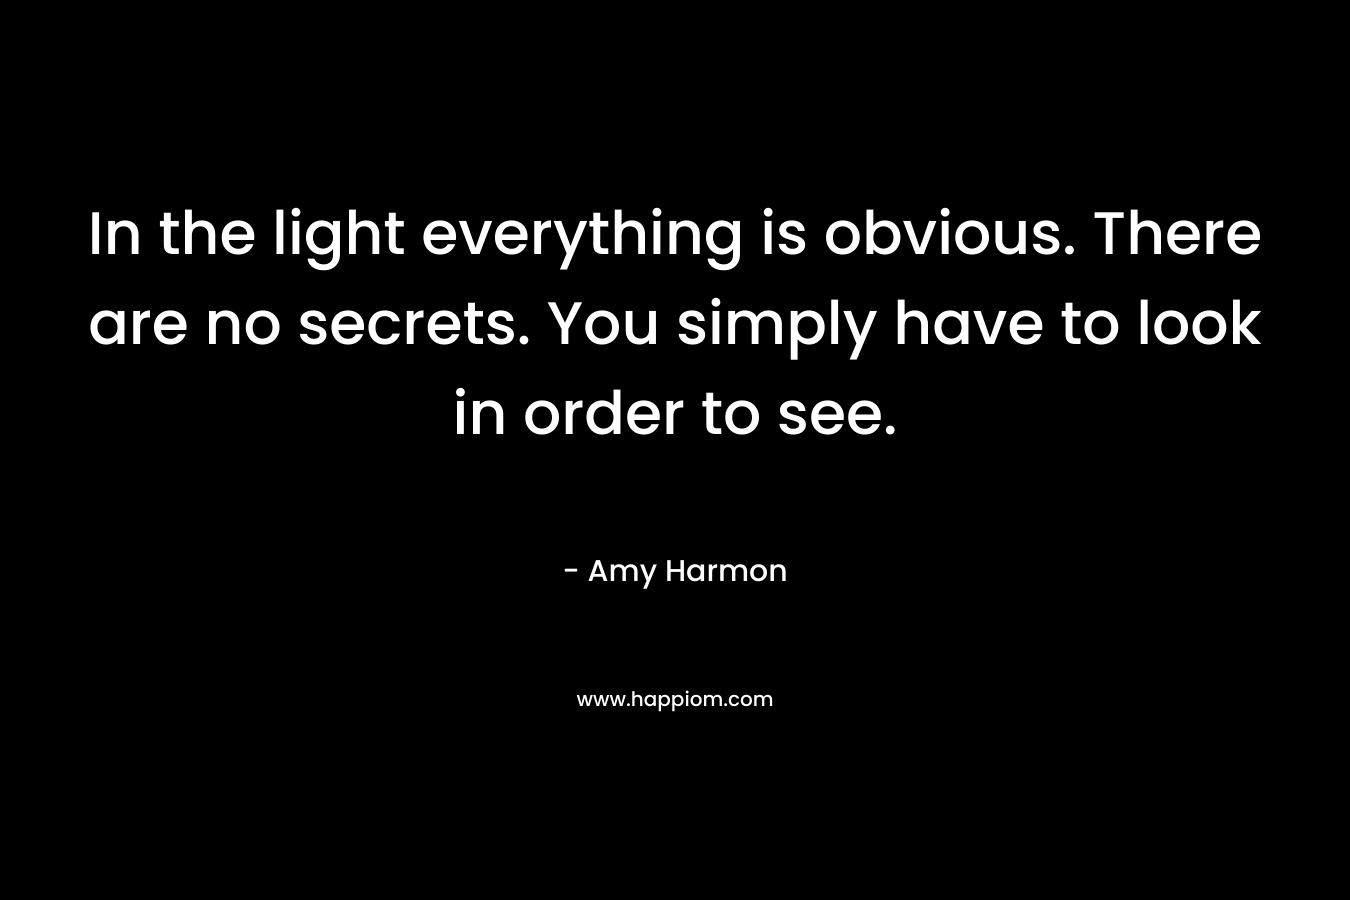 In the light everything is obvious. There are no secrets. You simply have to look in order to see.